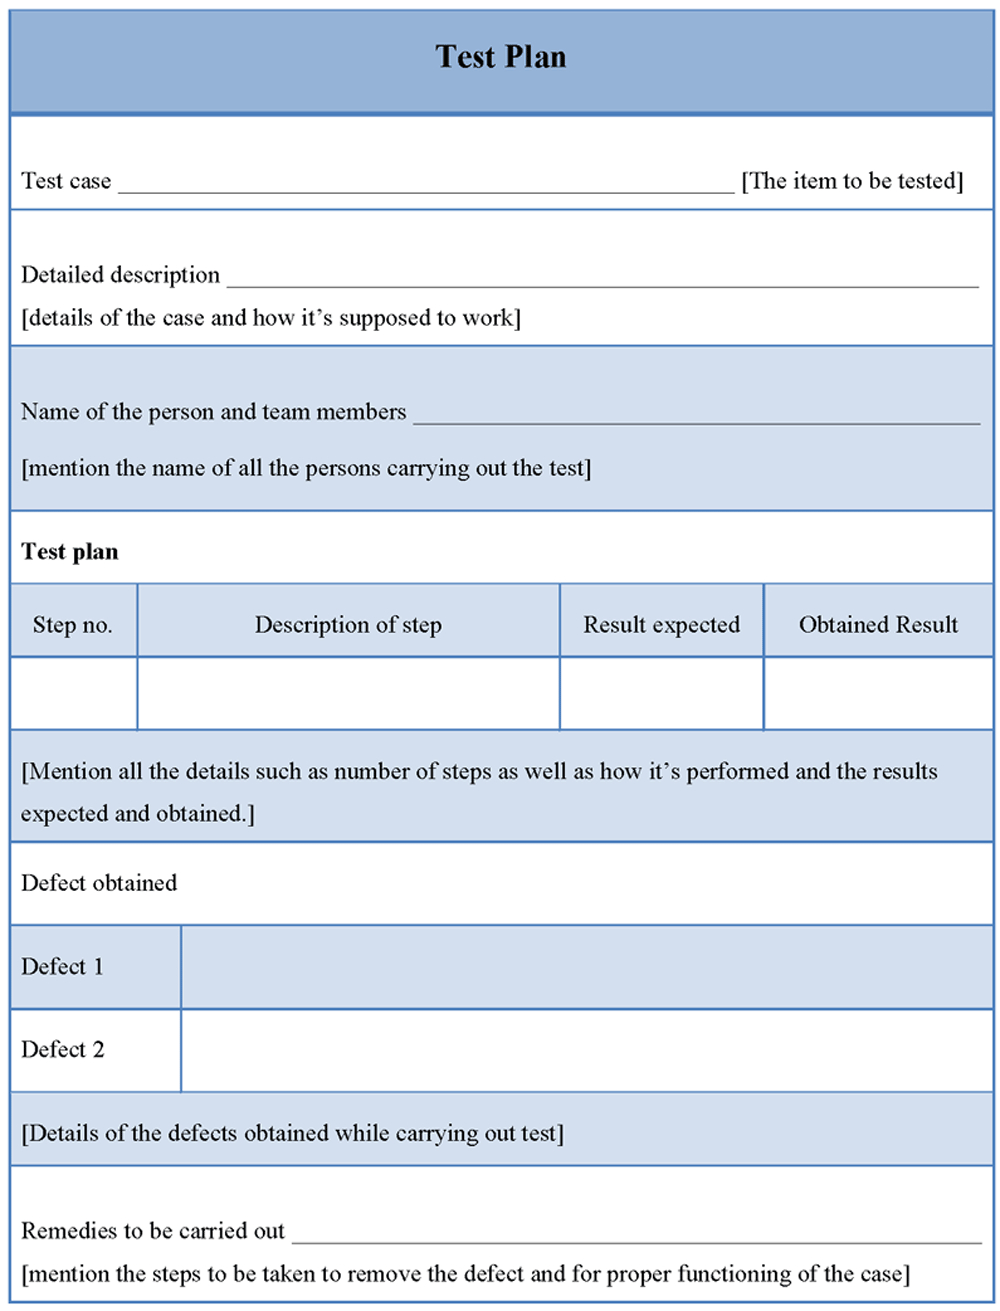 Test Plan Template Format, Sample Of Test Plan Template With Regard To Test Template For Word